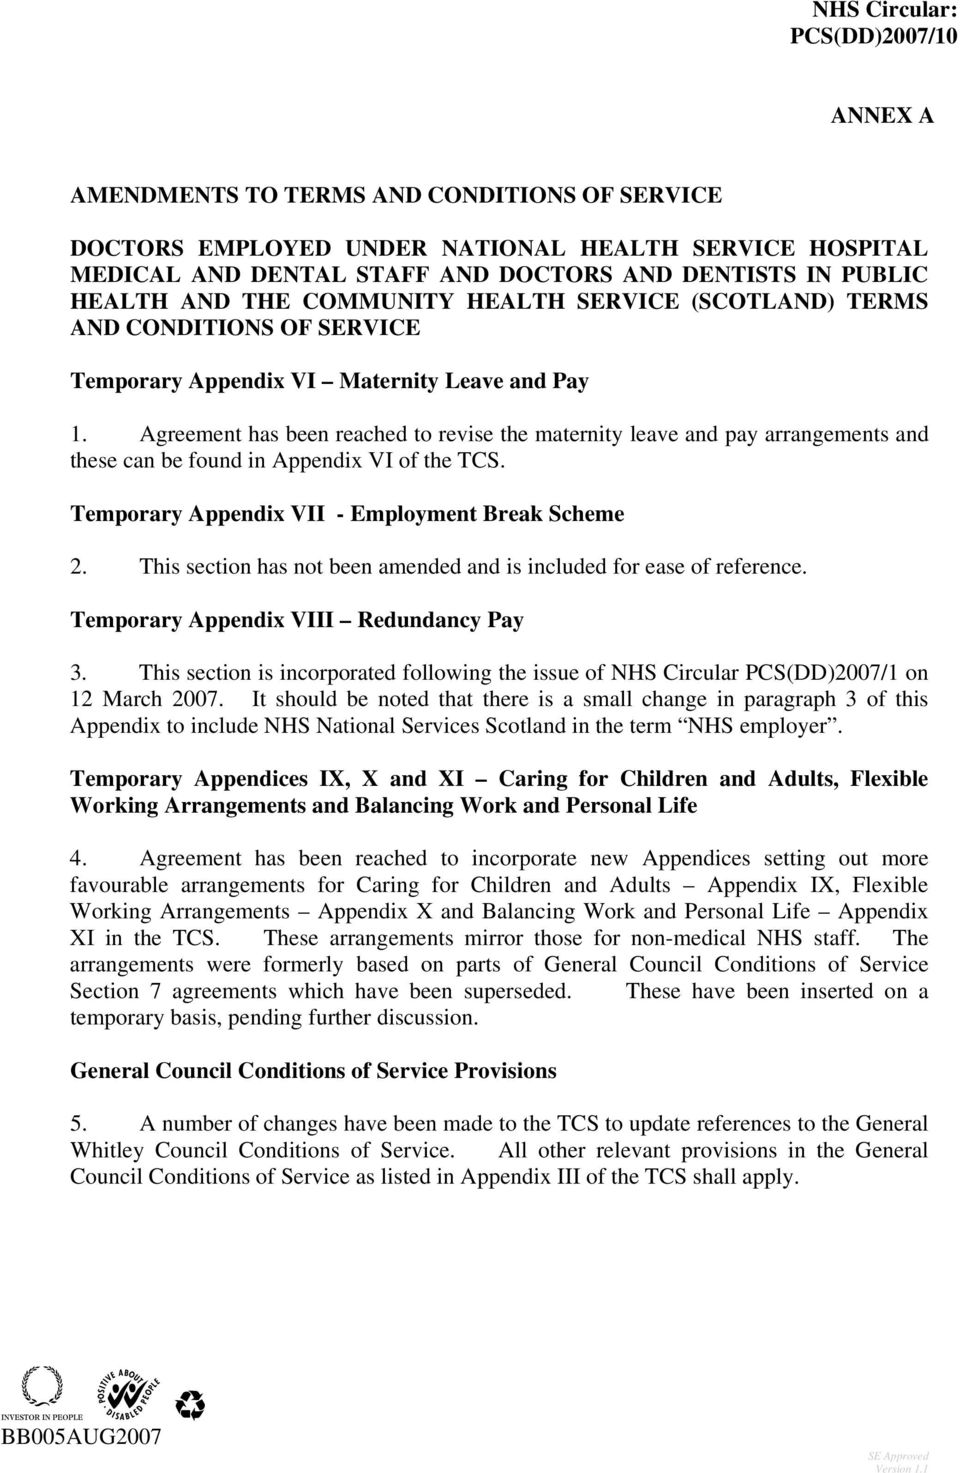 Agreement has been reached to revise the maternity leave and pay arrangements and these can be found in Appendix VI of the TCS. Temporary Appendix VII - Employment Break Scheme 2.